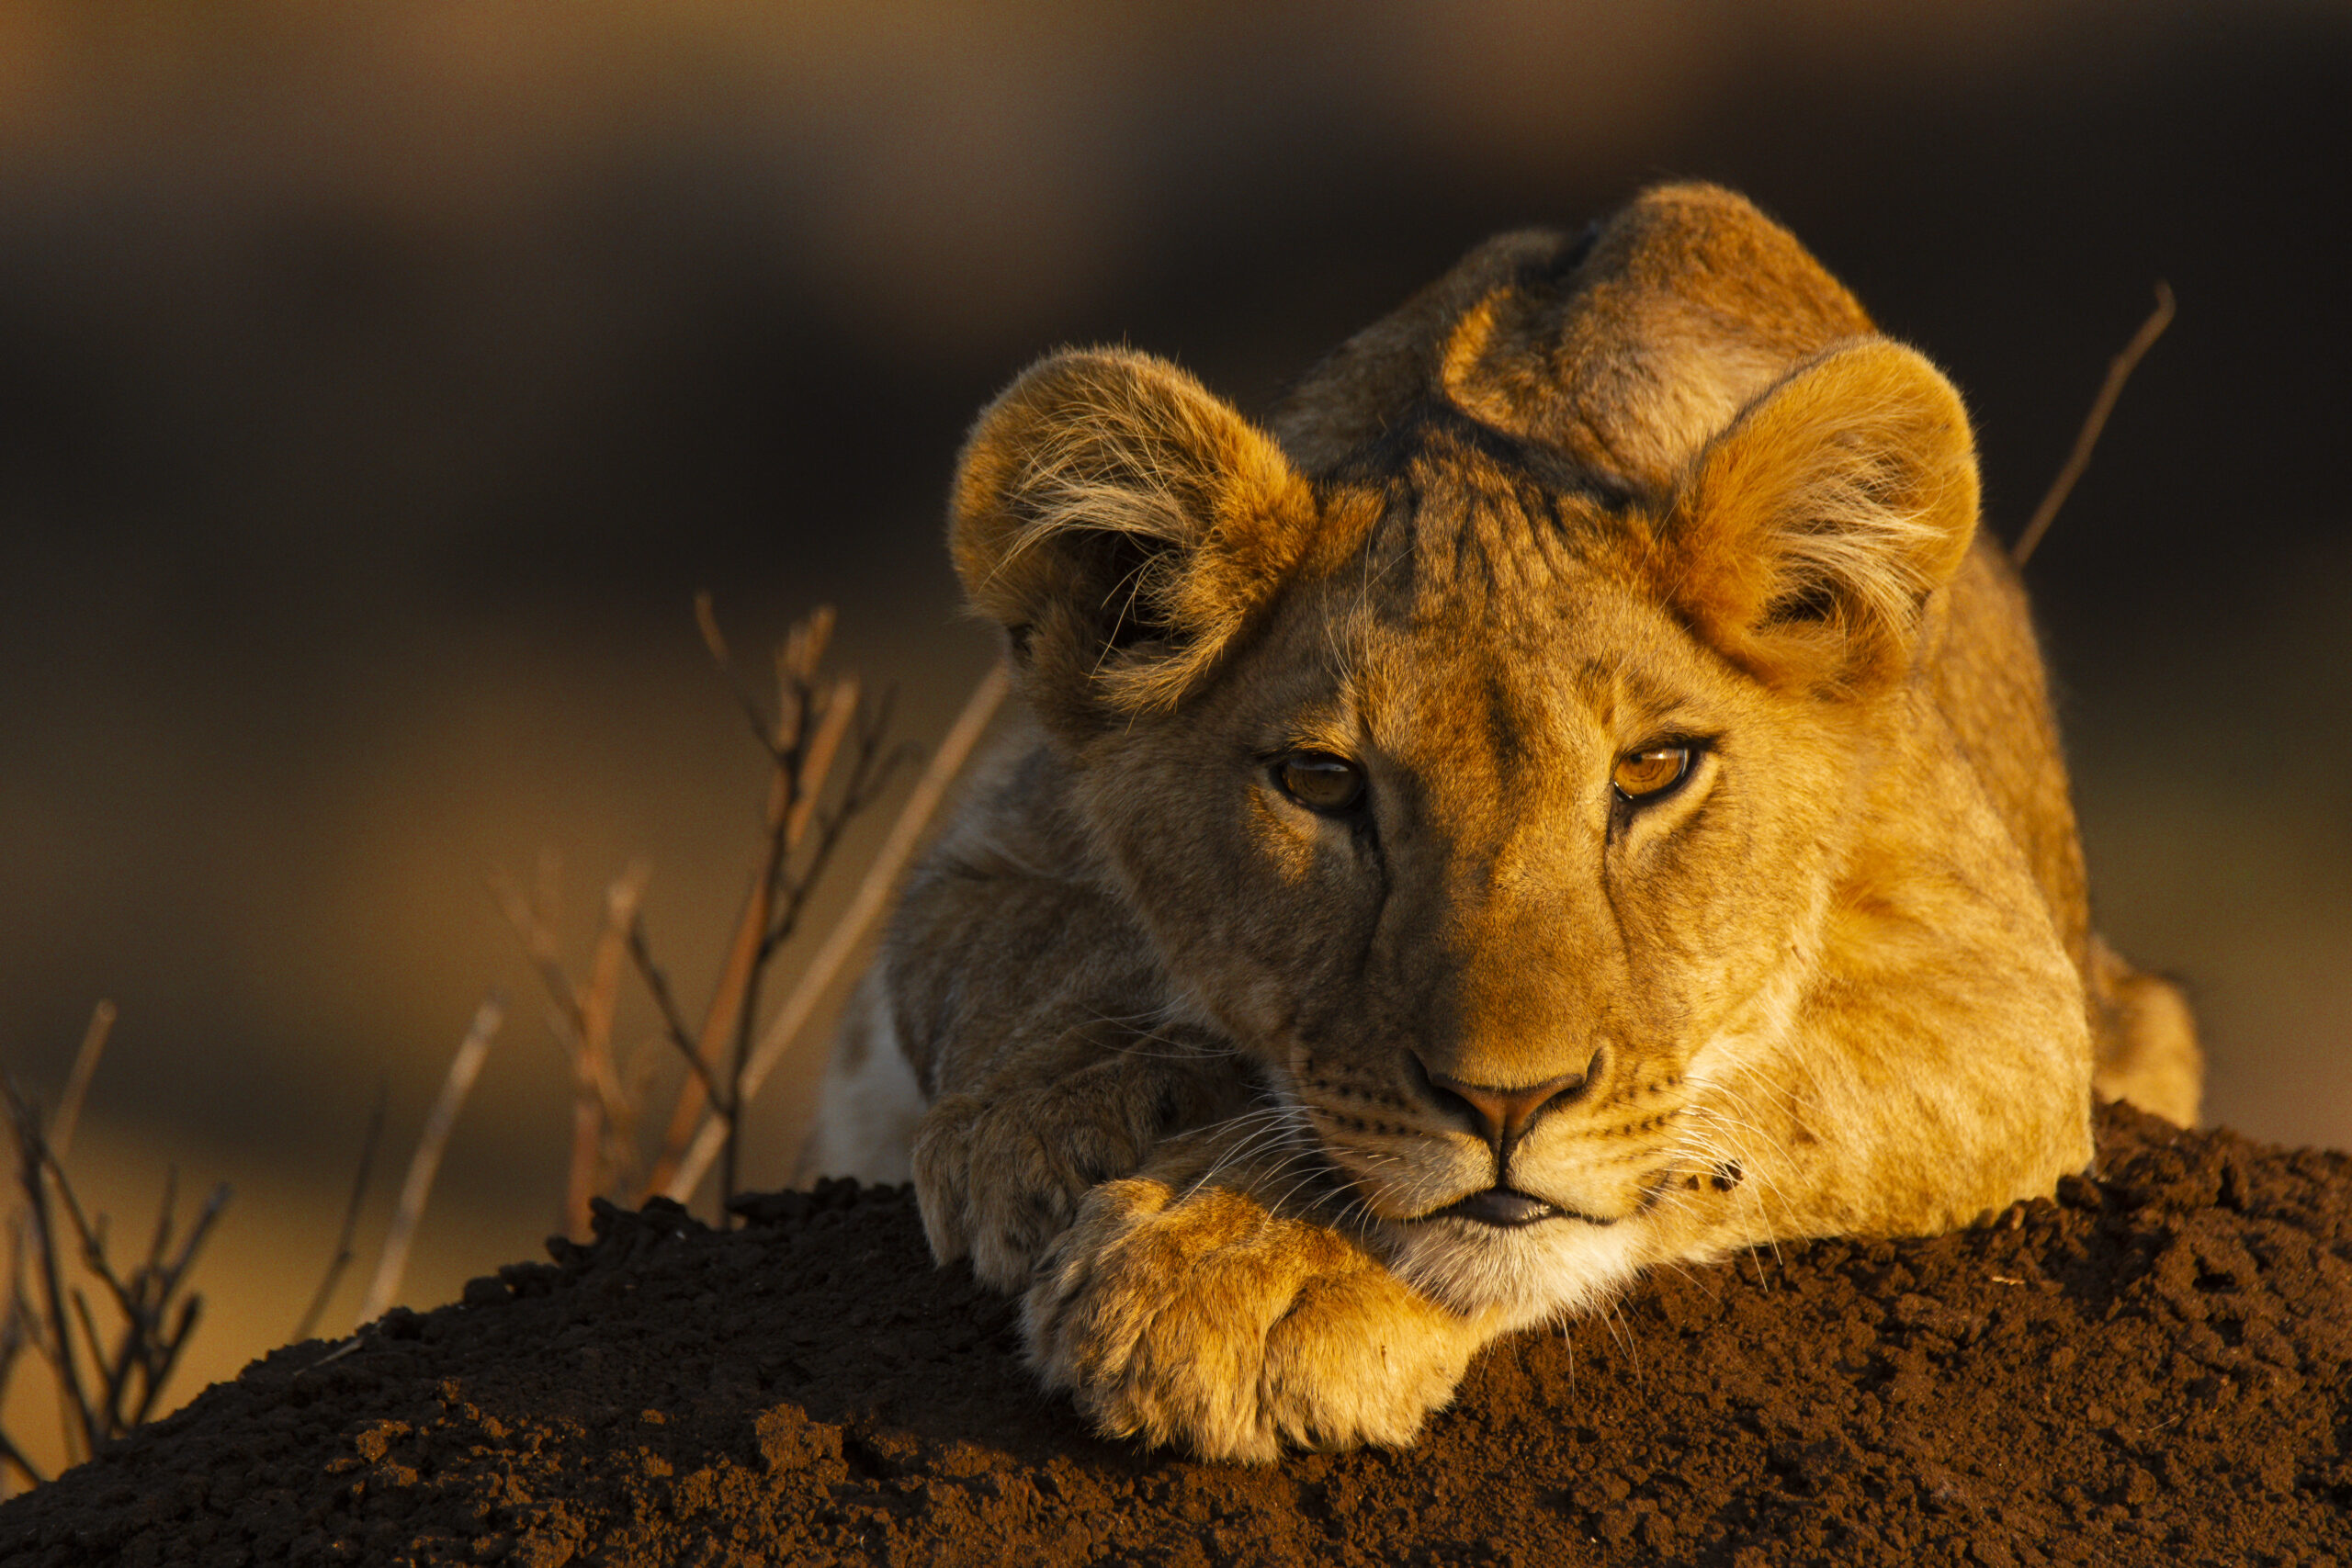 A young lion cub looking back at the camera while lying on a termite mound in the golden sunlight